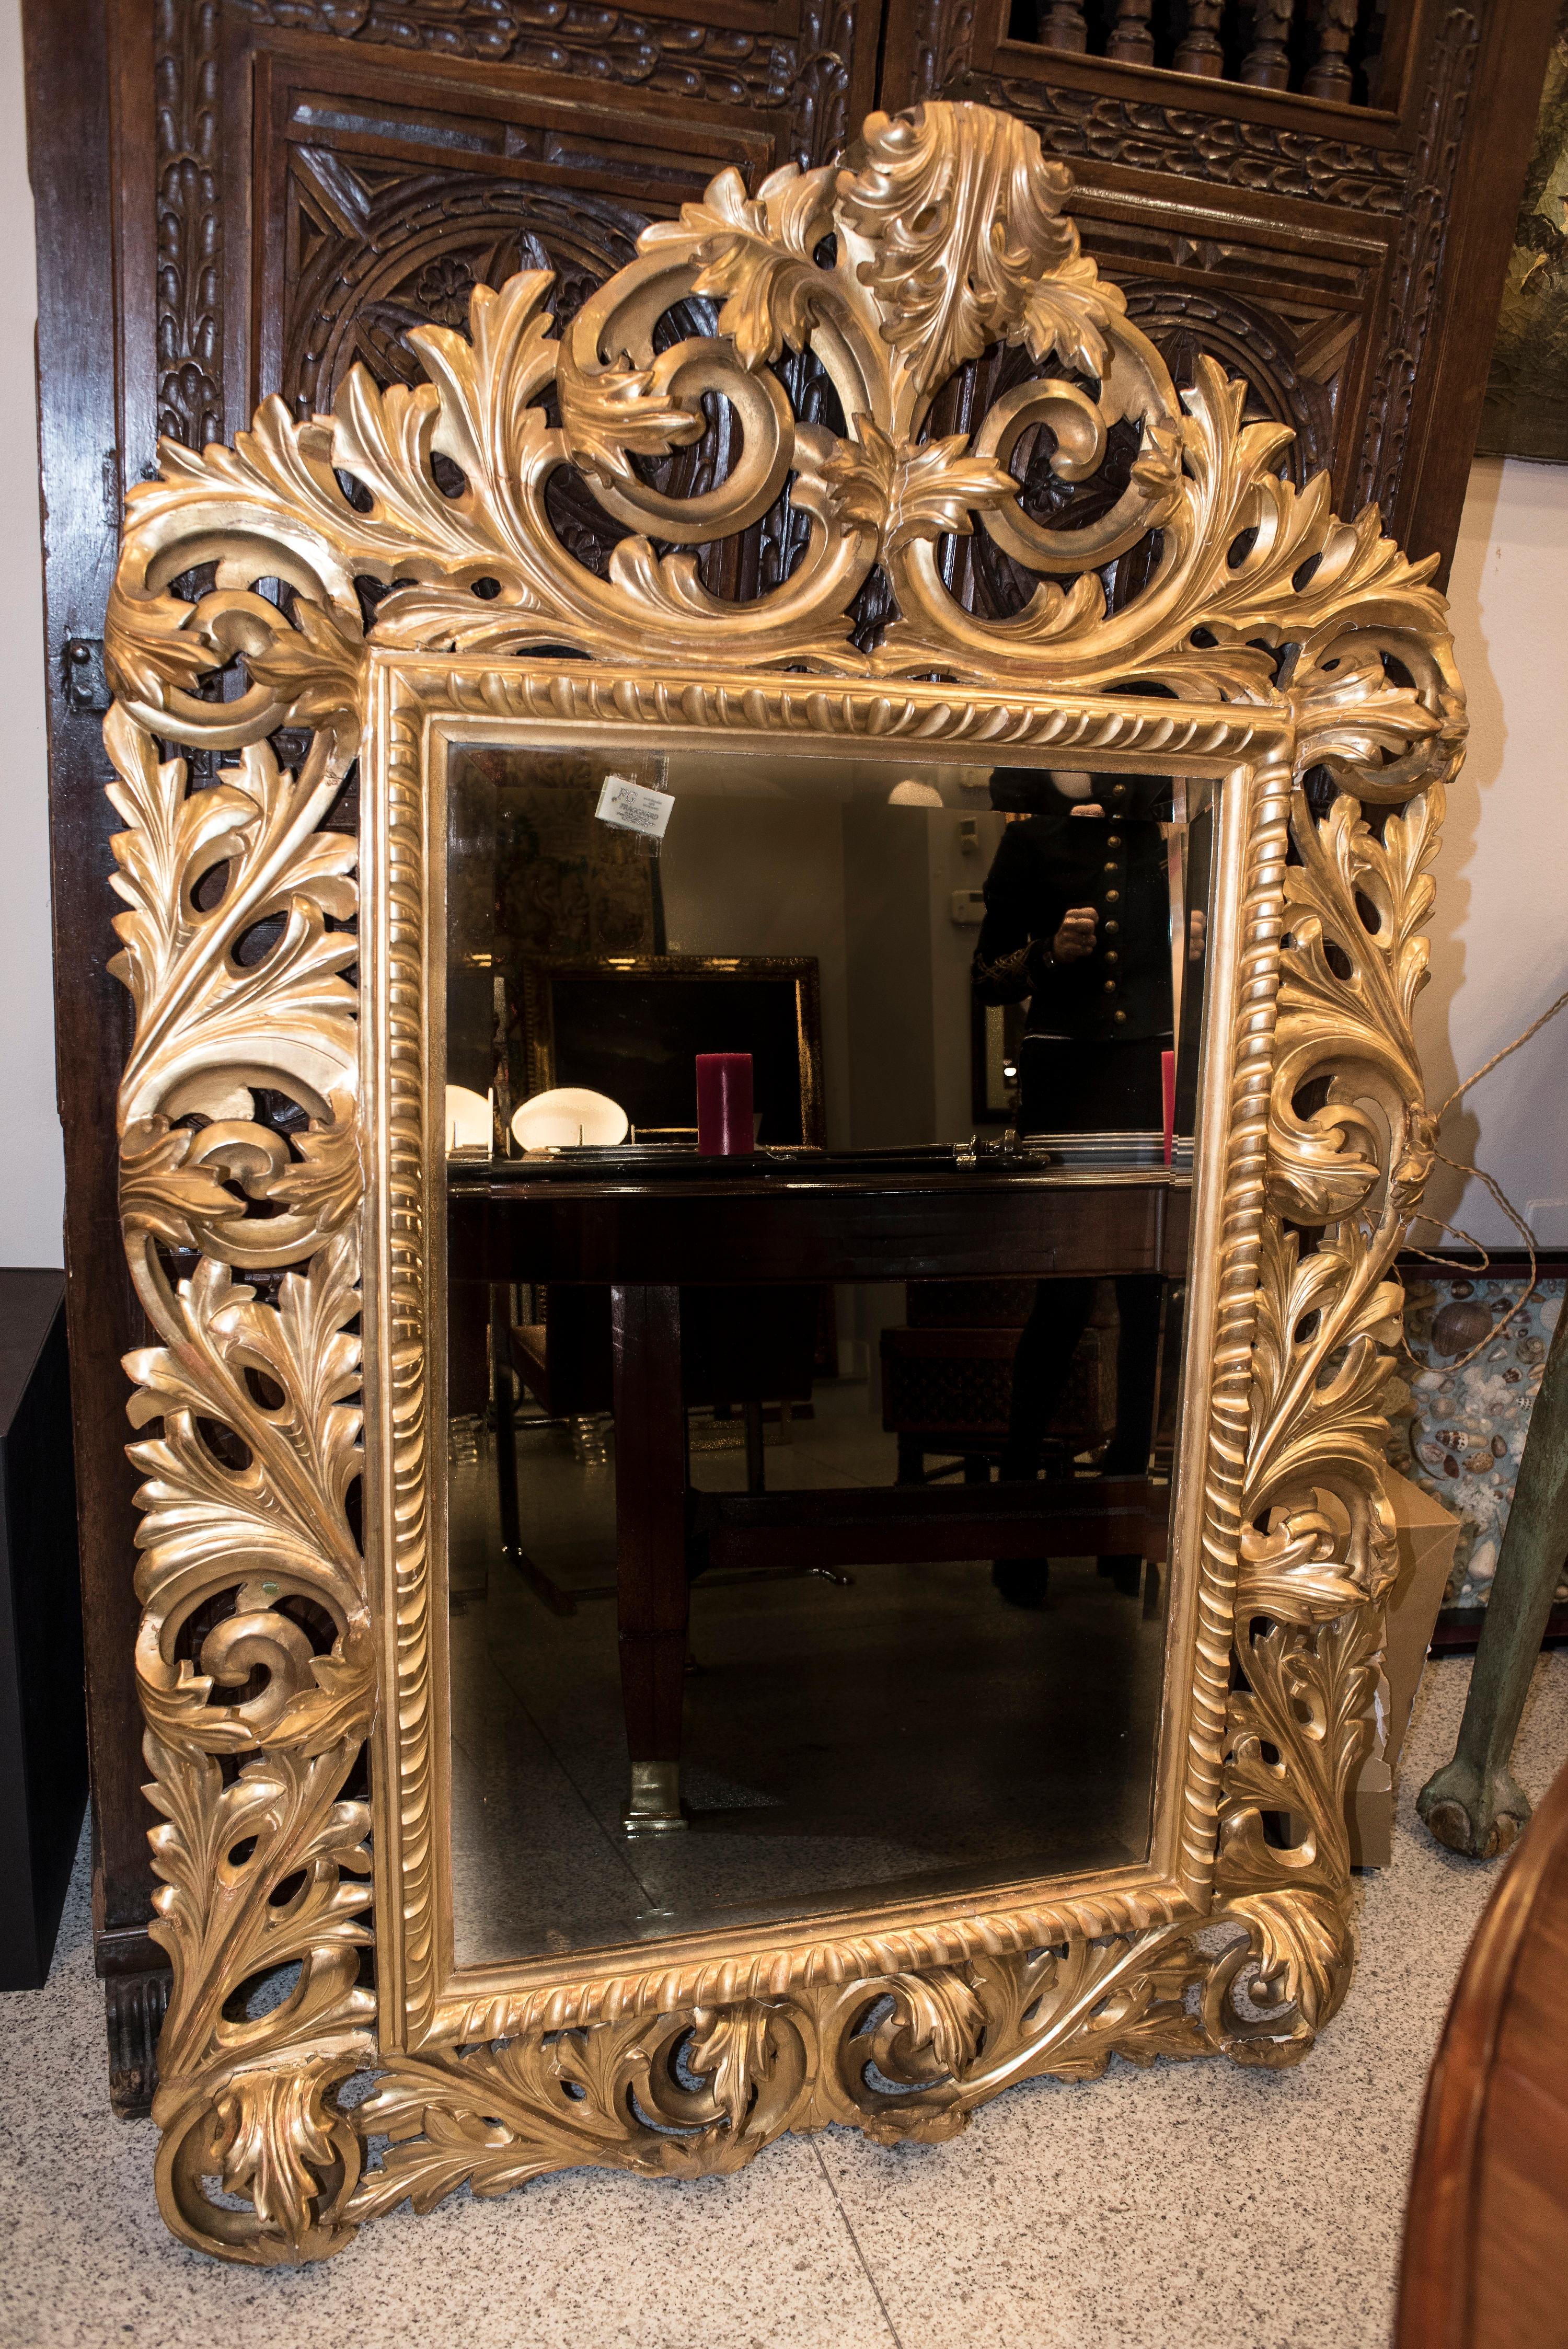 Stunning Napoleon III , circa 1880 , French carved and golden wood wall mirror with Fine gold polished with agate stone..Carved leaves and roleos surrounded the rectangular profile of this amazing and unique mirror.
It has been purchased in an